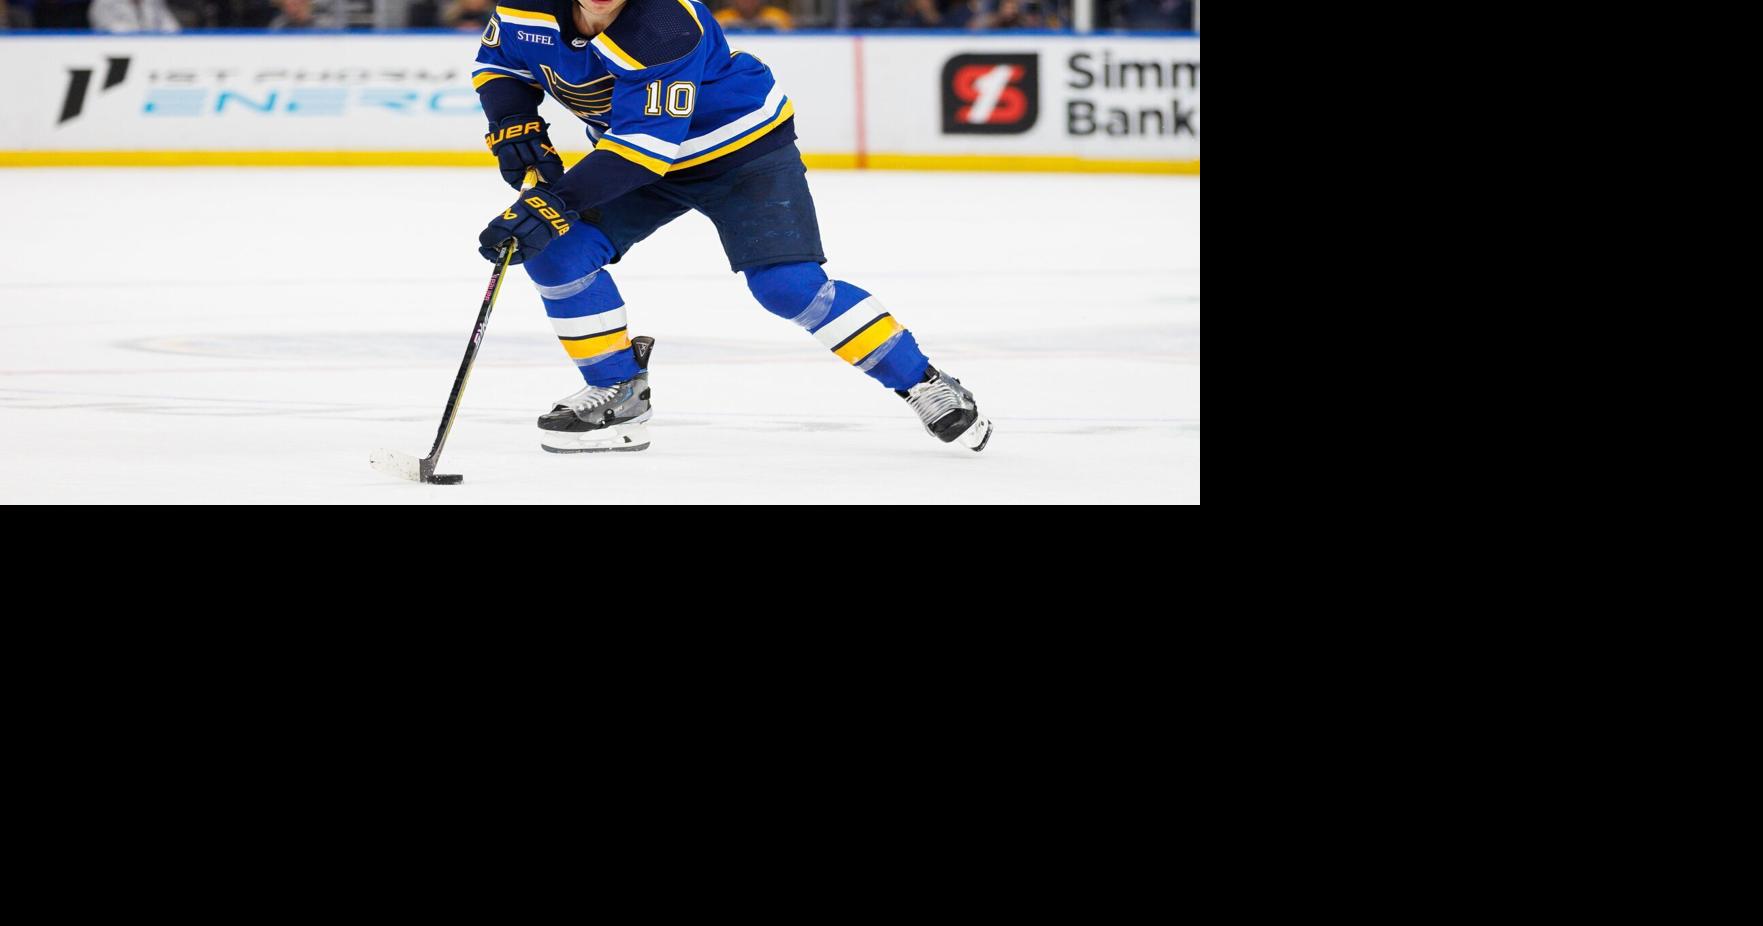 Brayden Schenn Is The St. Louis Blues' Captain - 24th In Franchise History  